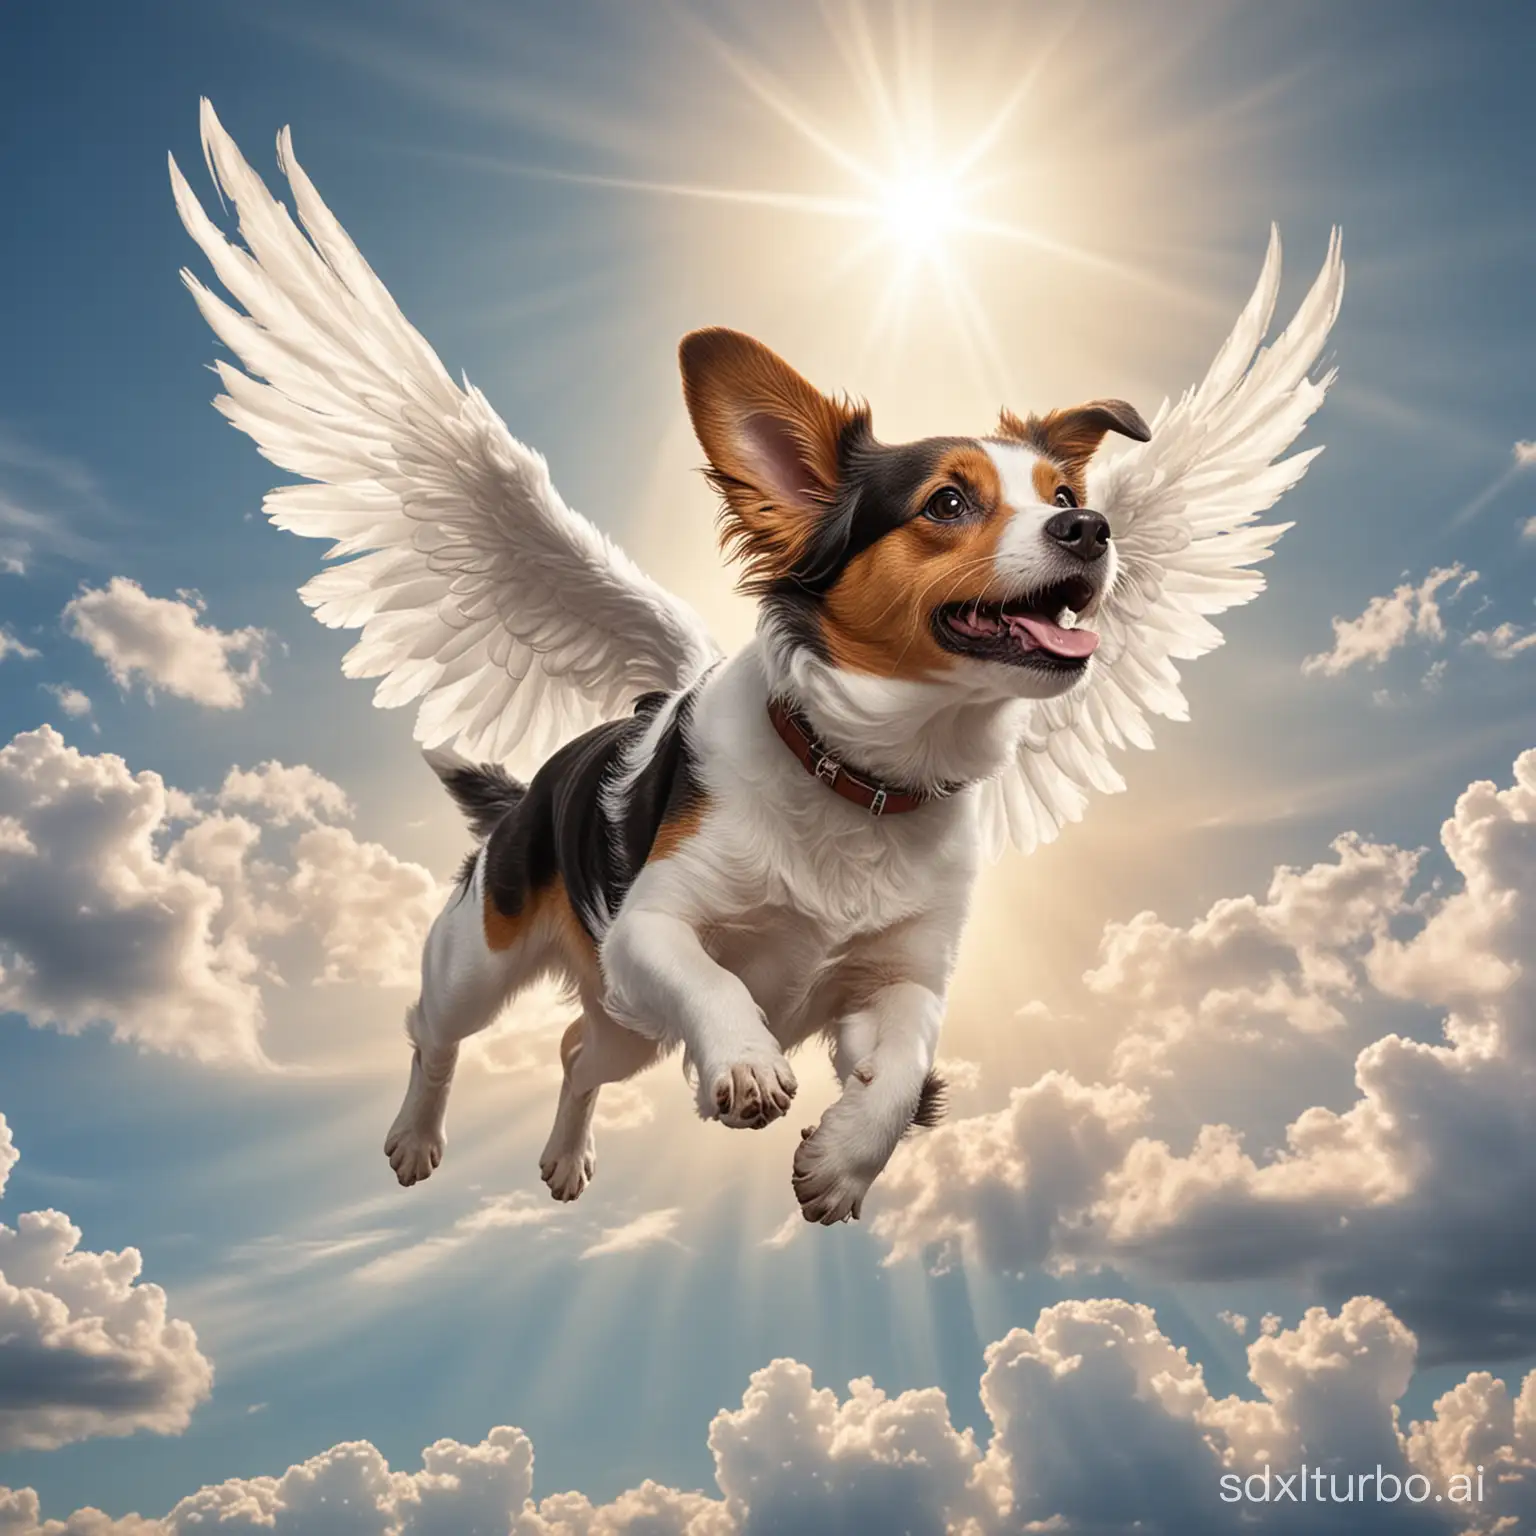 A dog with wings hovers in the sky